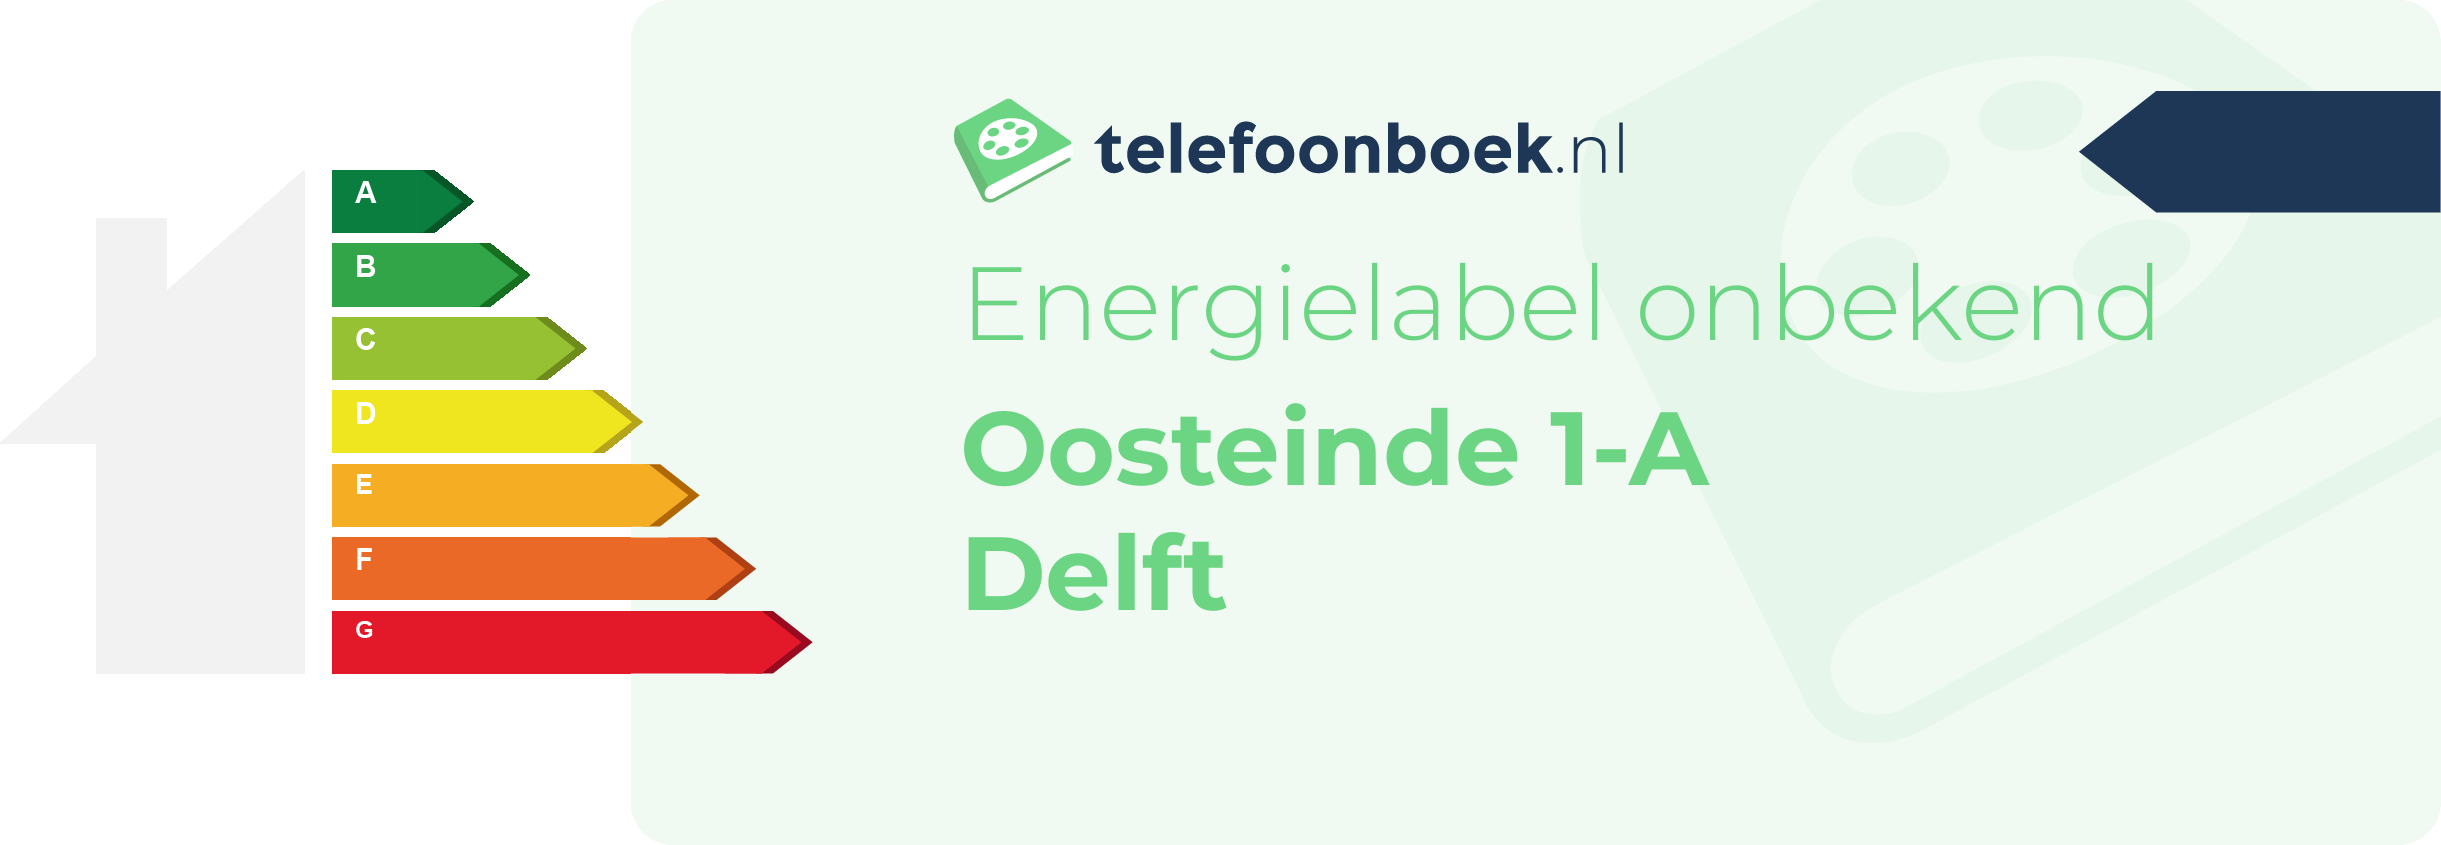 Energielabel Oosteinde 1-A Delft